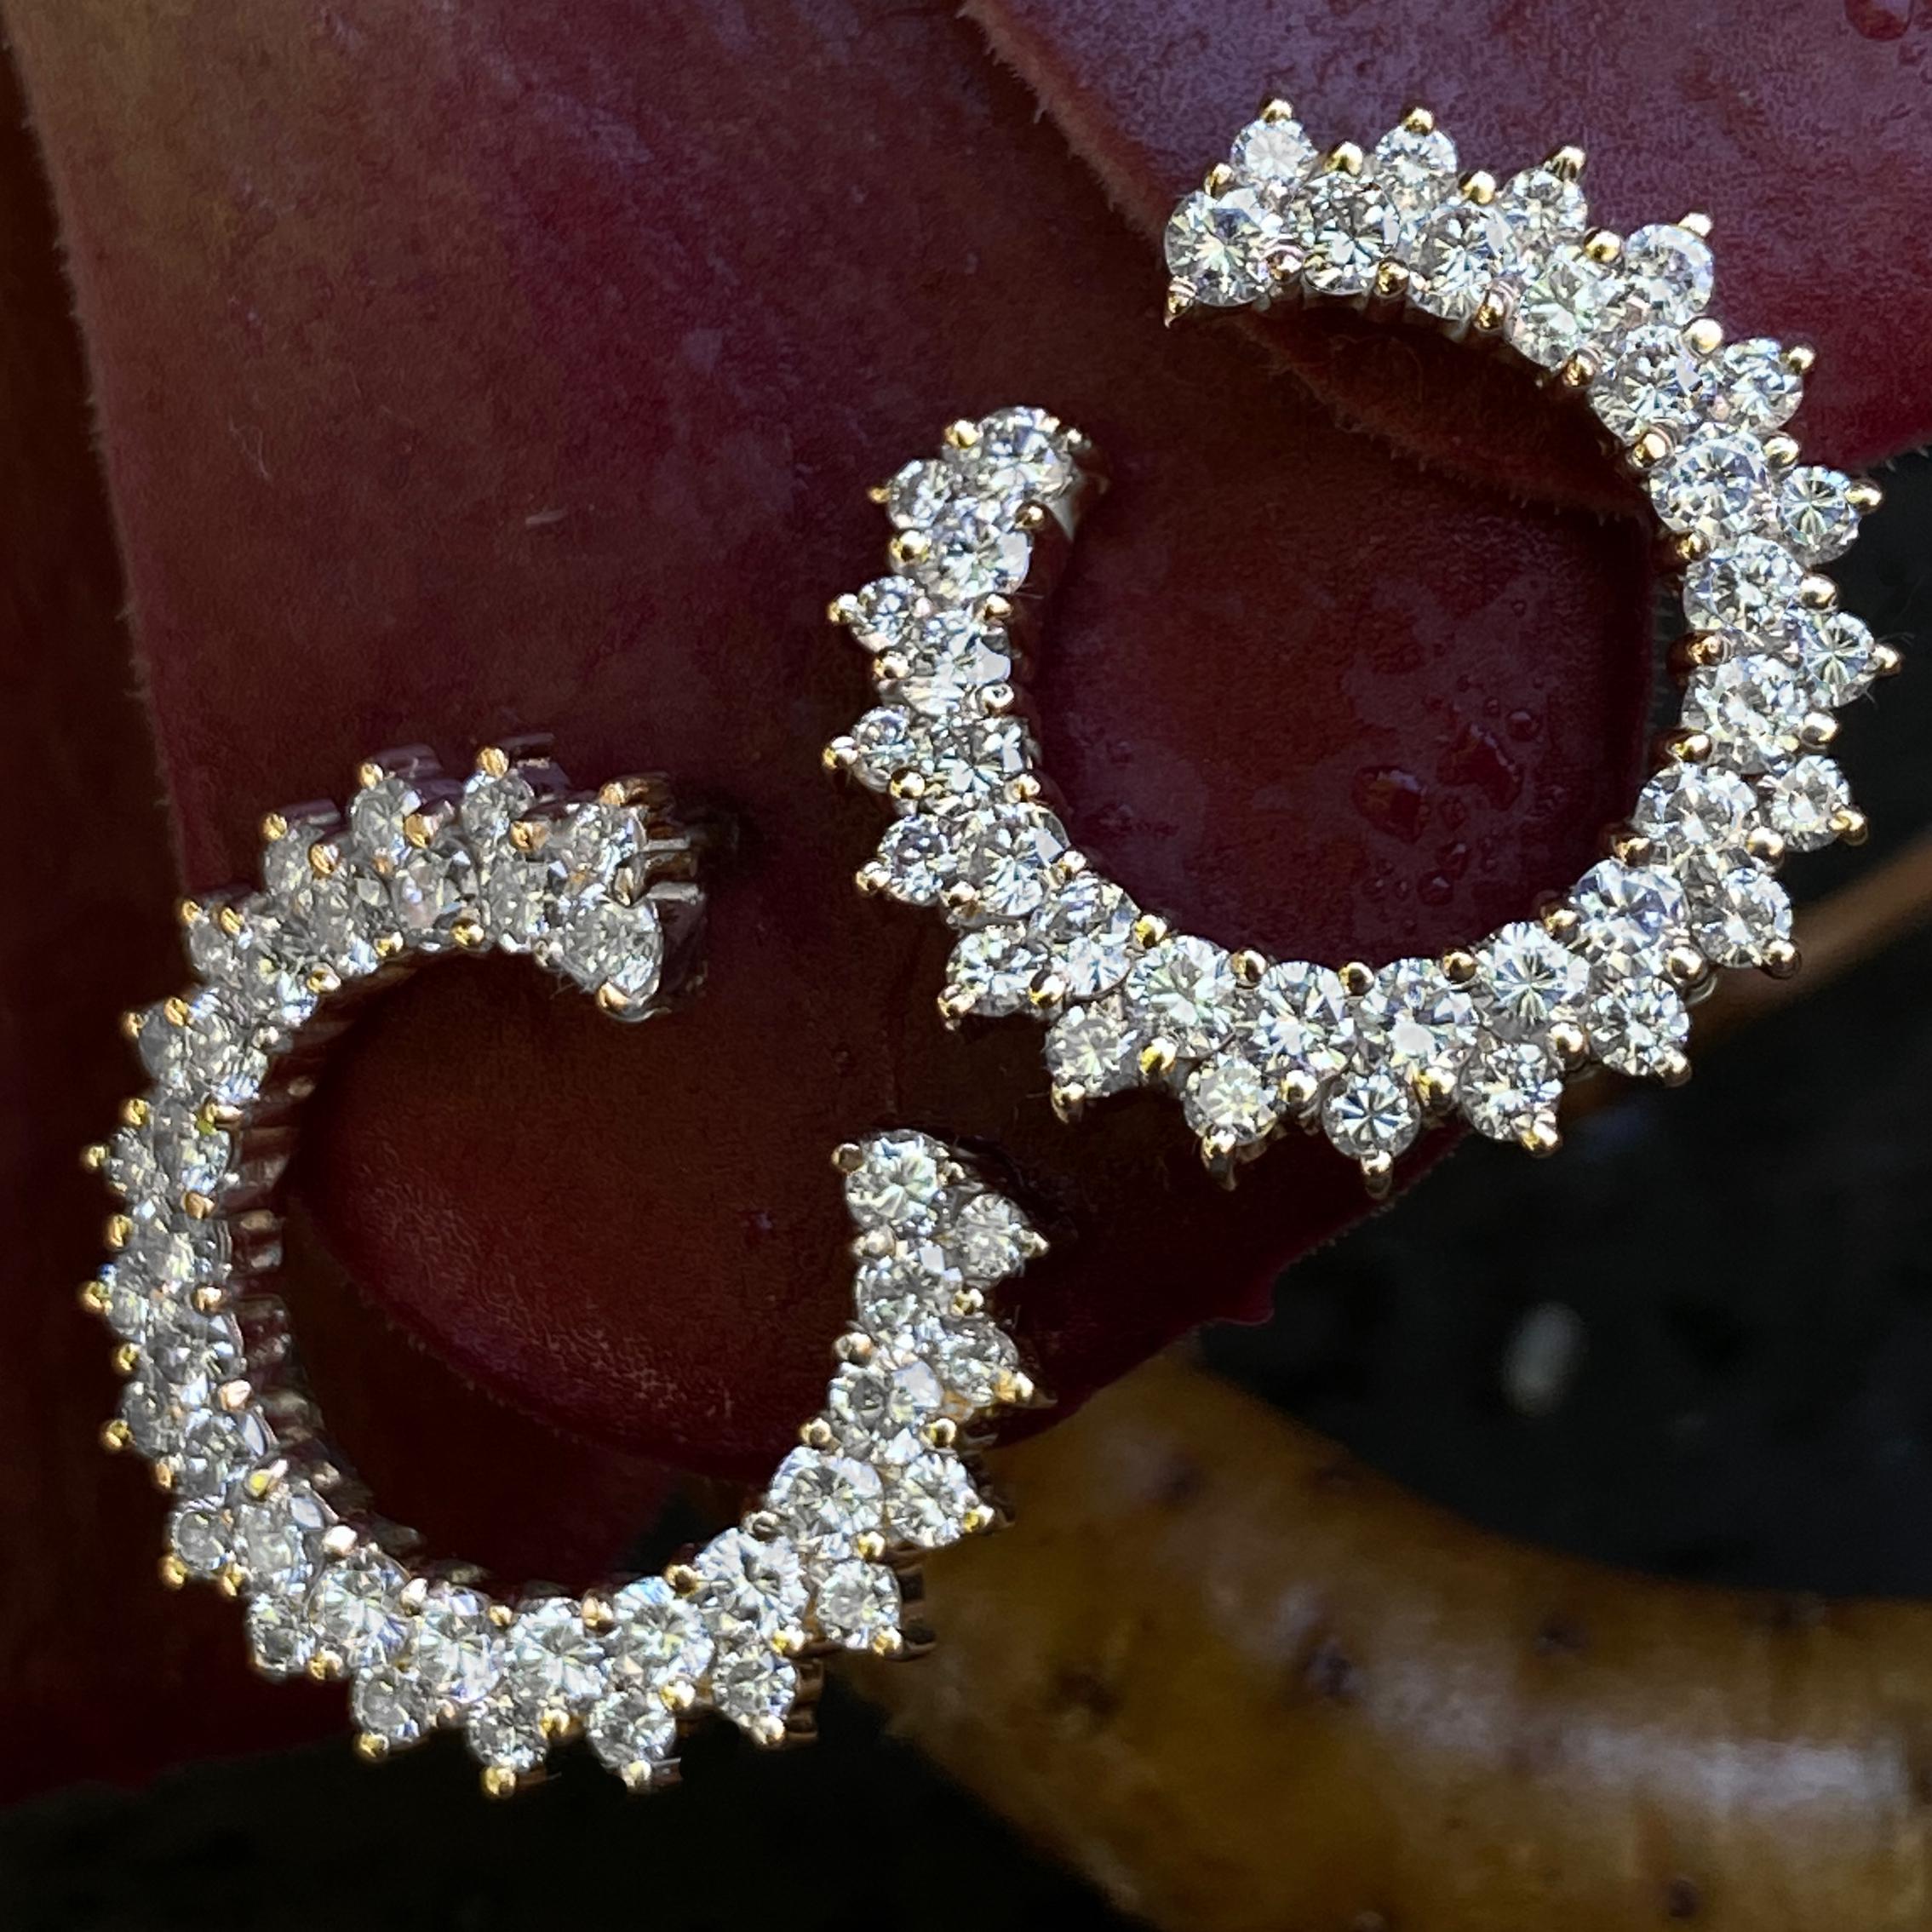 A different take on diamond hoops, these lie flat against the ear and feature two rows of bright white diamonds.  The hoop shape is  torqued a bit so that they 